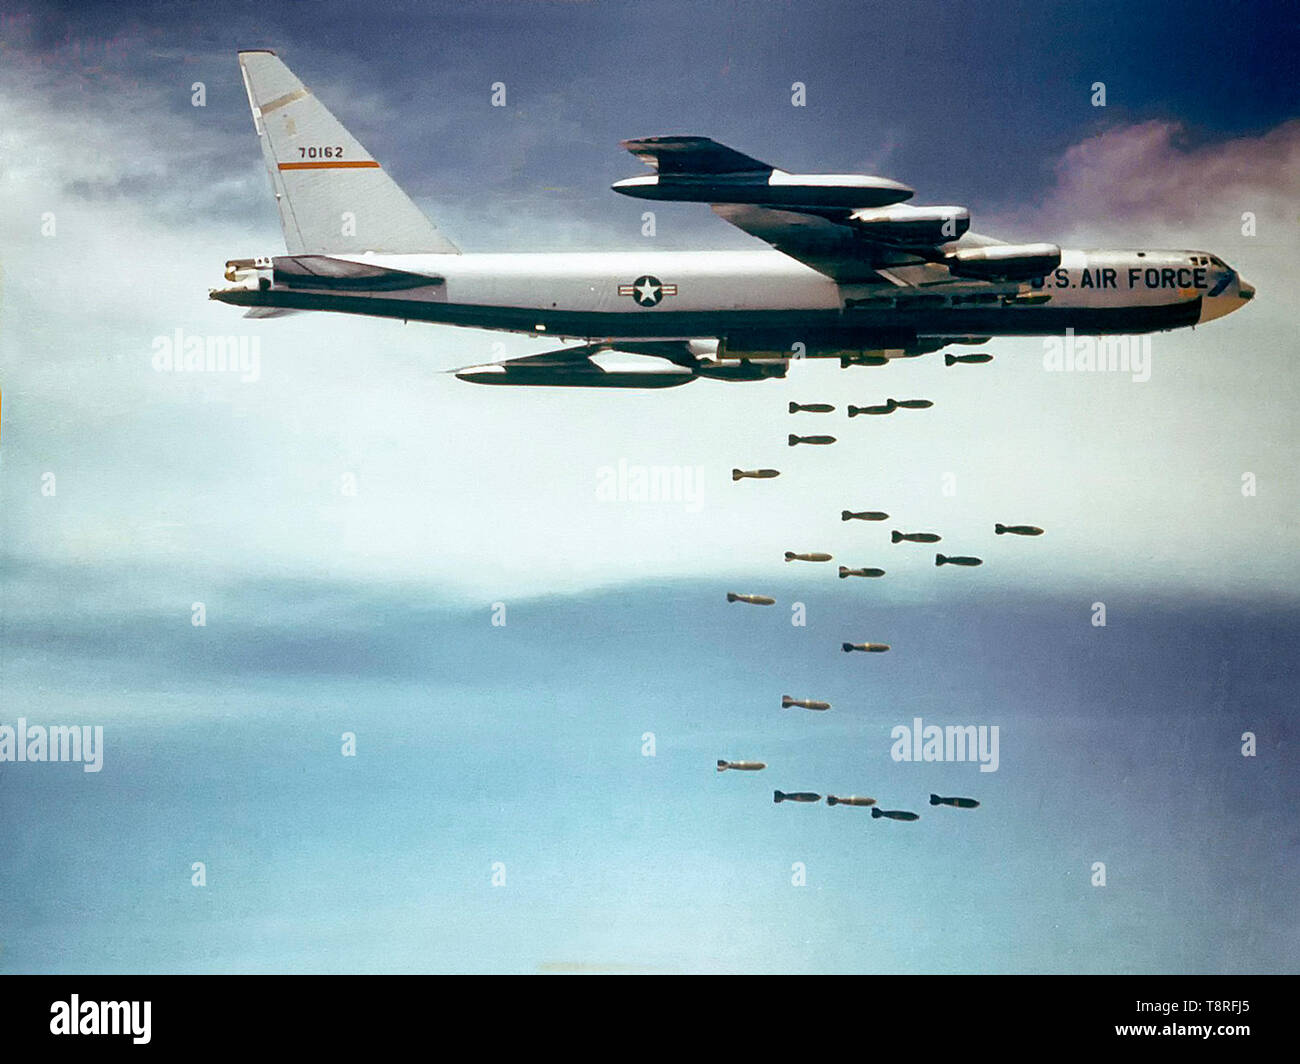 A U.S. Air Force Boeing B-52F-70-BW Stratofortress (s/n 57-0162, nicknamed 'Casper The Friendly Ghost') from the 320th Bomb Wing dropping Mk 117 750 lb (340 kg) bombs over Vietnam. Stock Photo